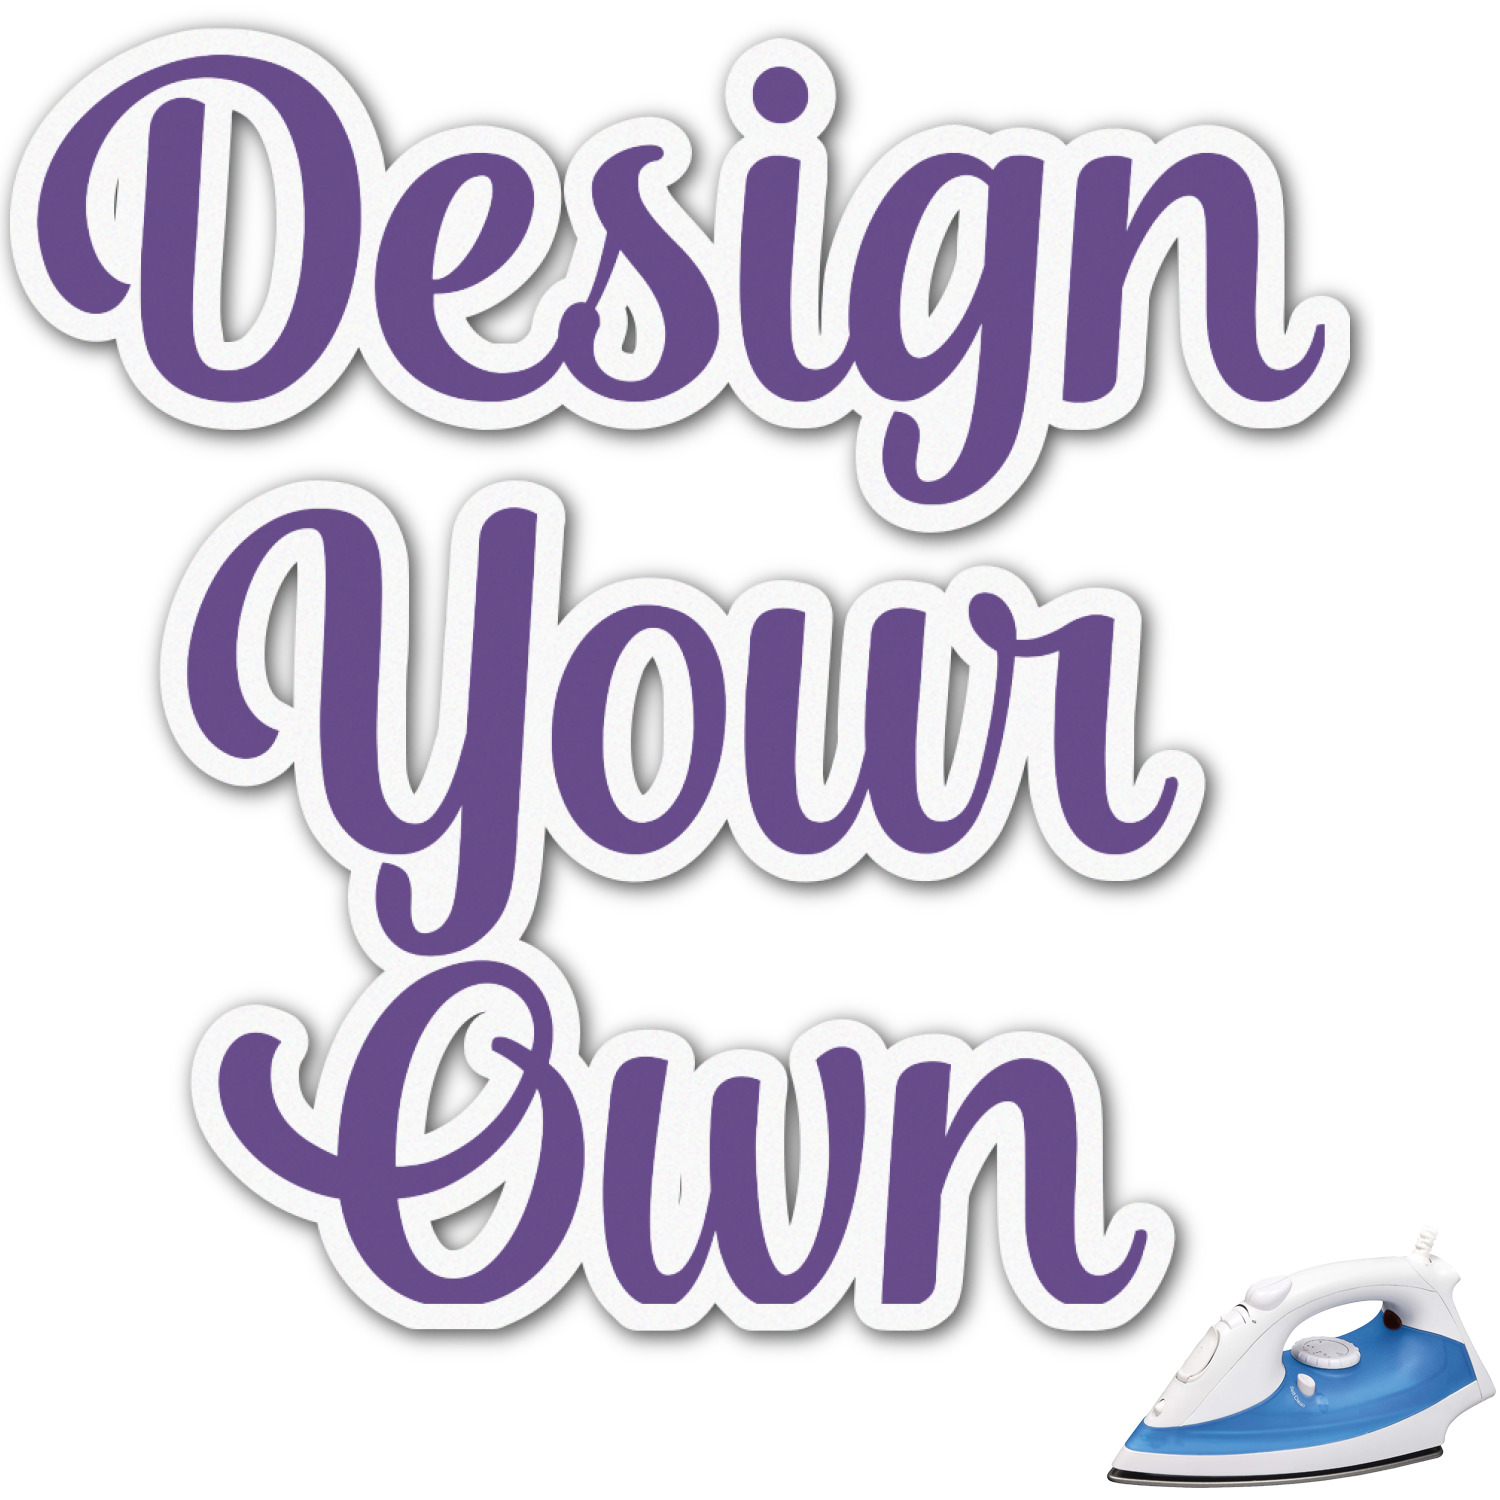 Design Your Own Graphic Iron On Transfer Up to 9 quot x9 quot (Personalized